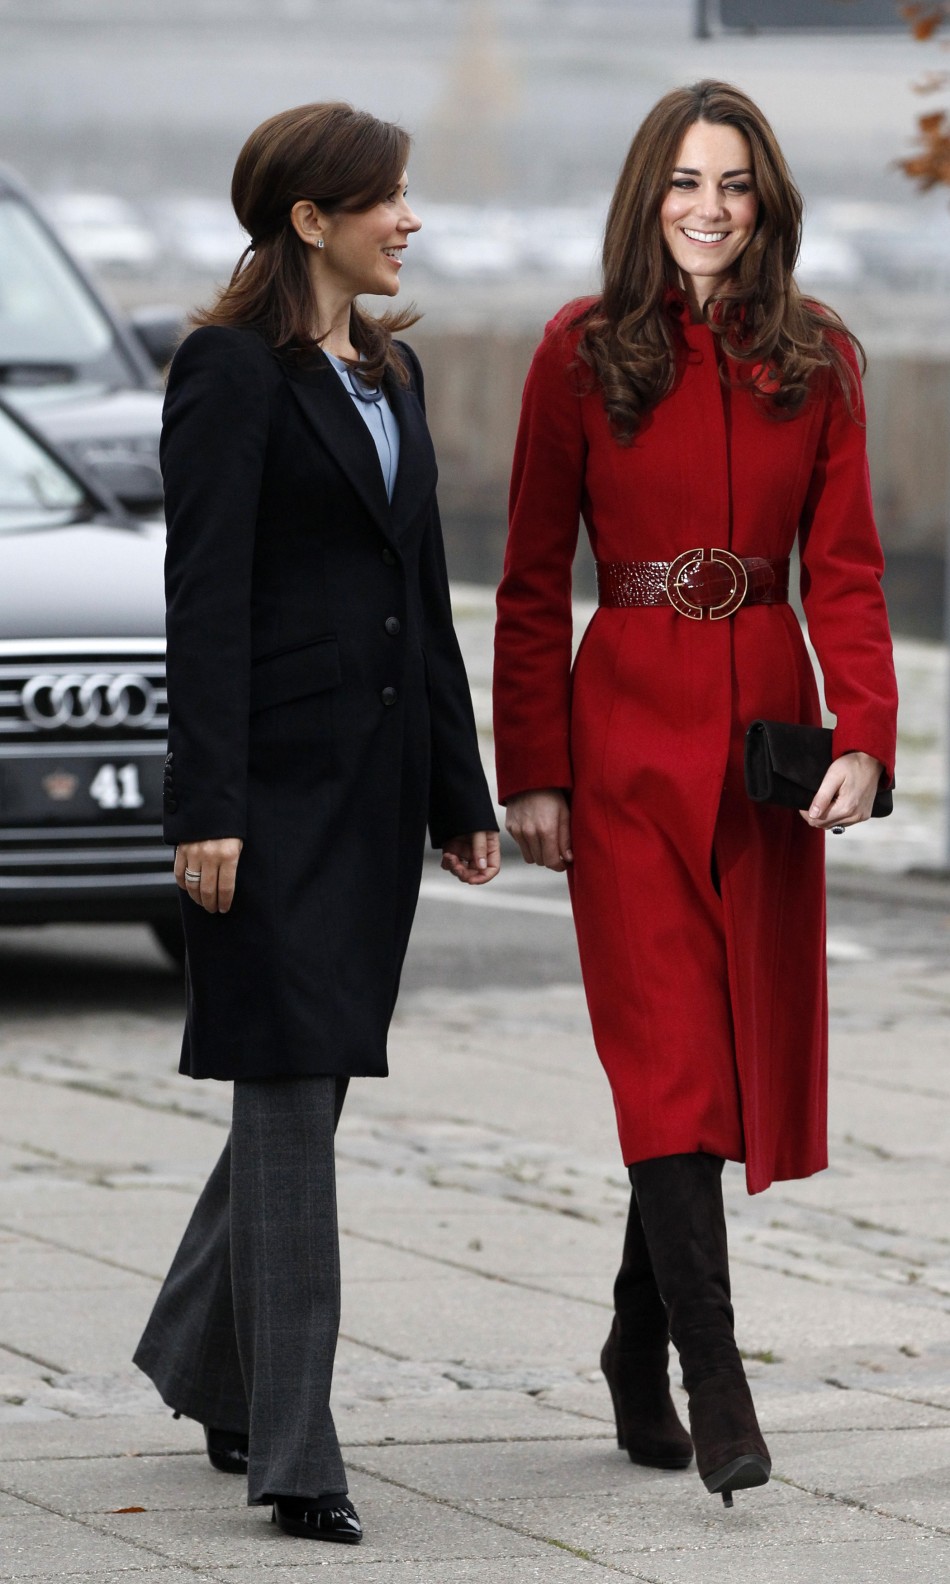 Kate Middleton Donning the Radiant Red